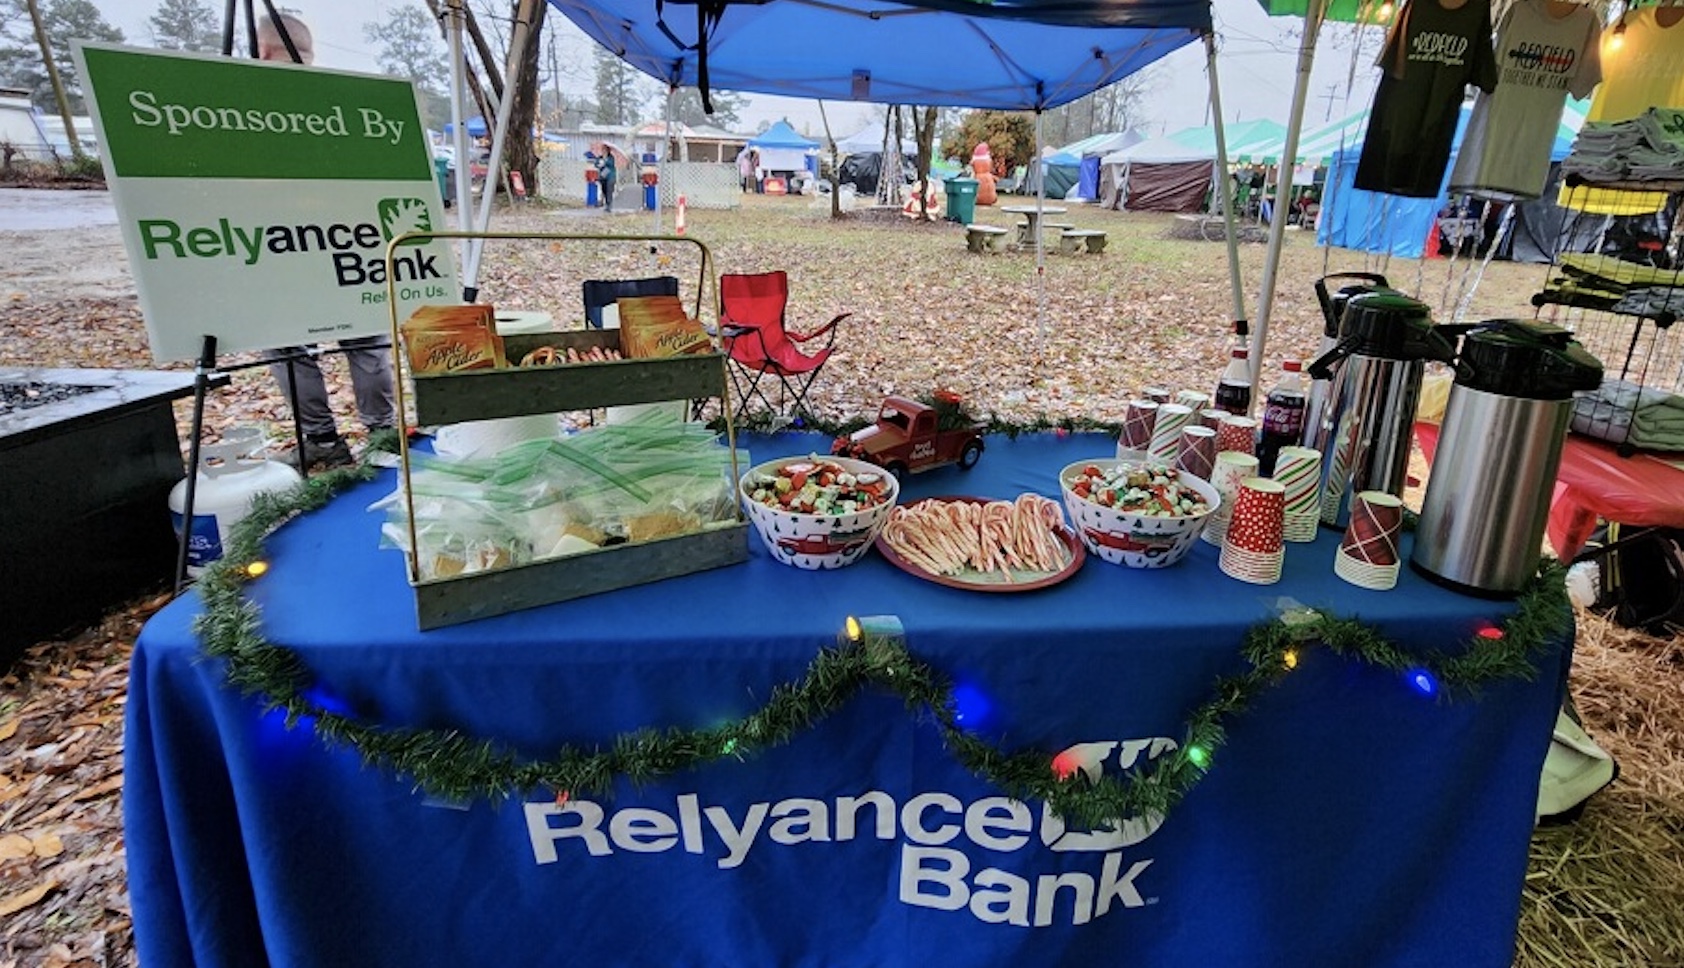 Relyance Bank cider booth at holiday market.